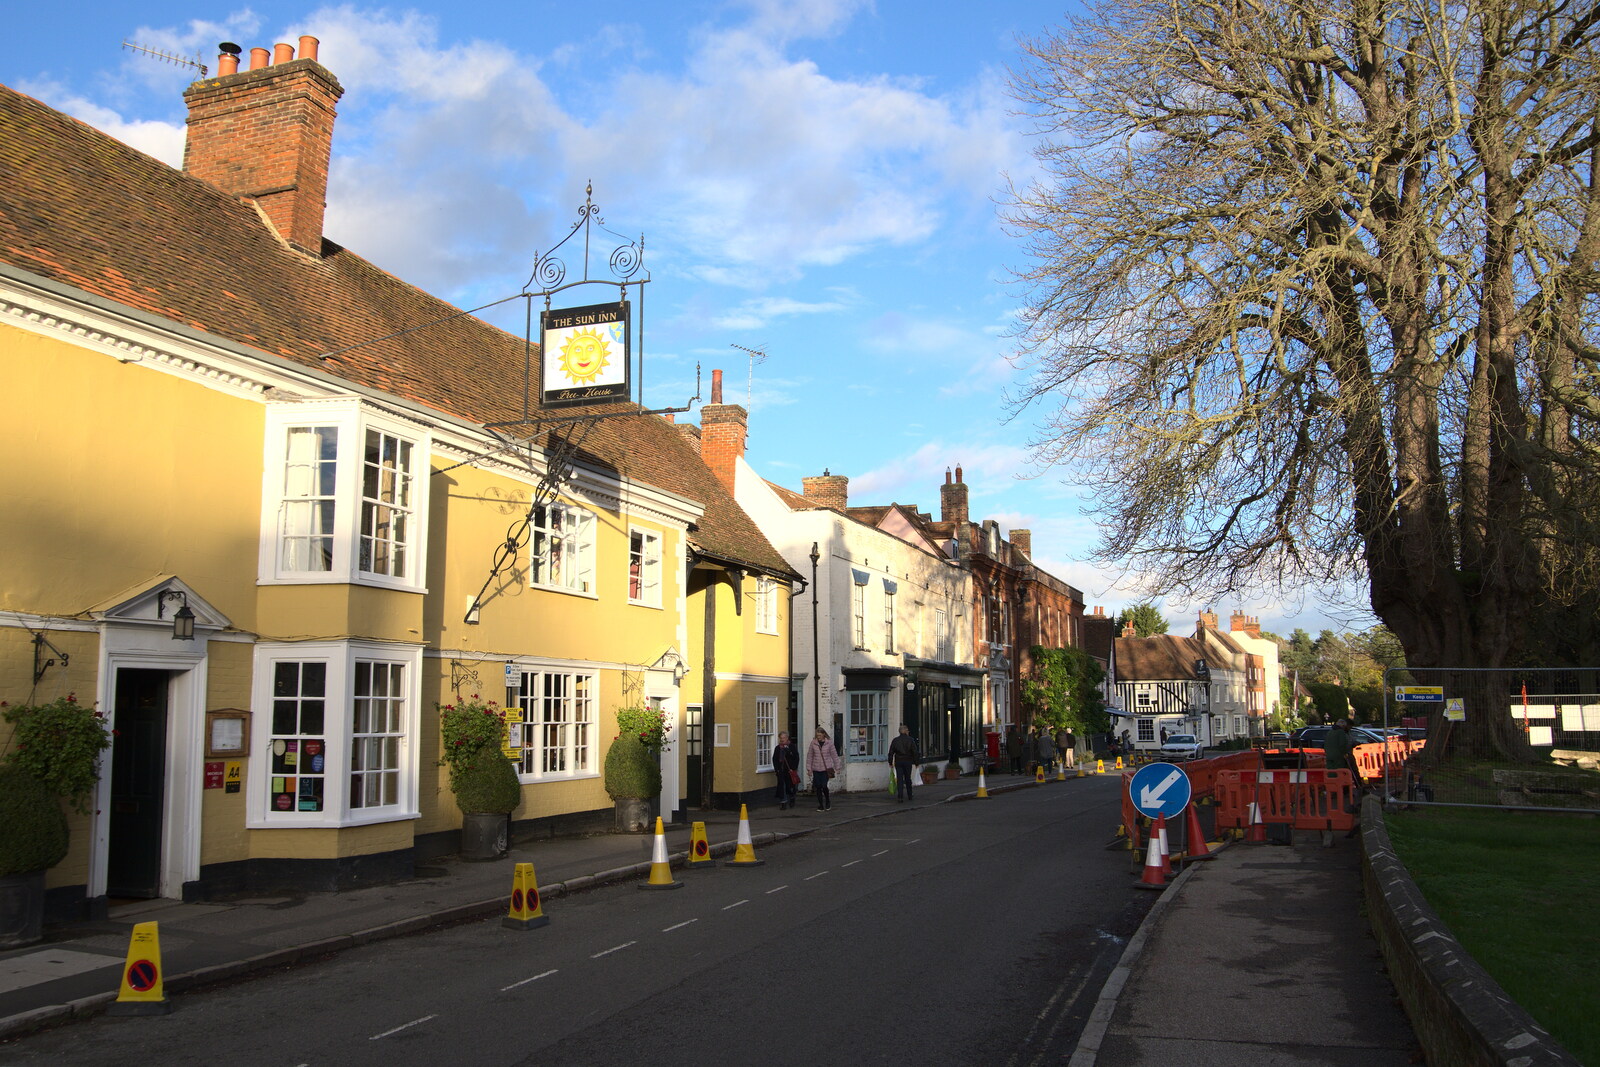 A Postcard from Flatford and Dedham, Suffolk and Essex, 9th November 2022: The Sun Inn in Dedham